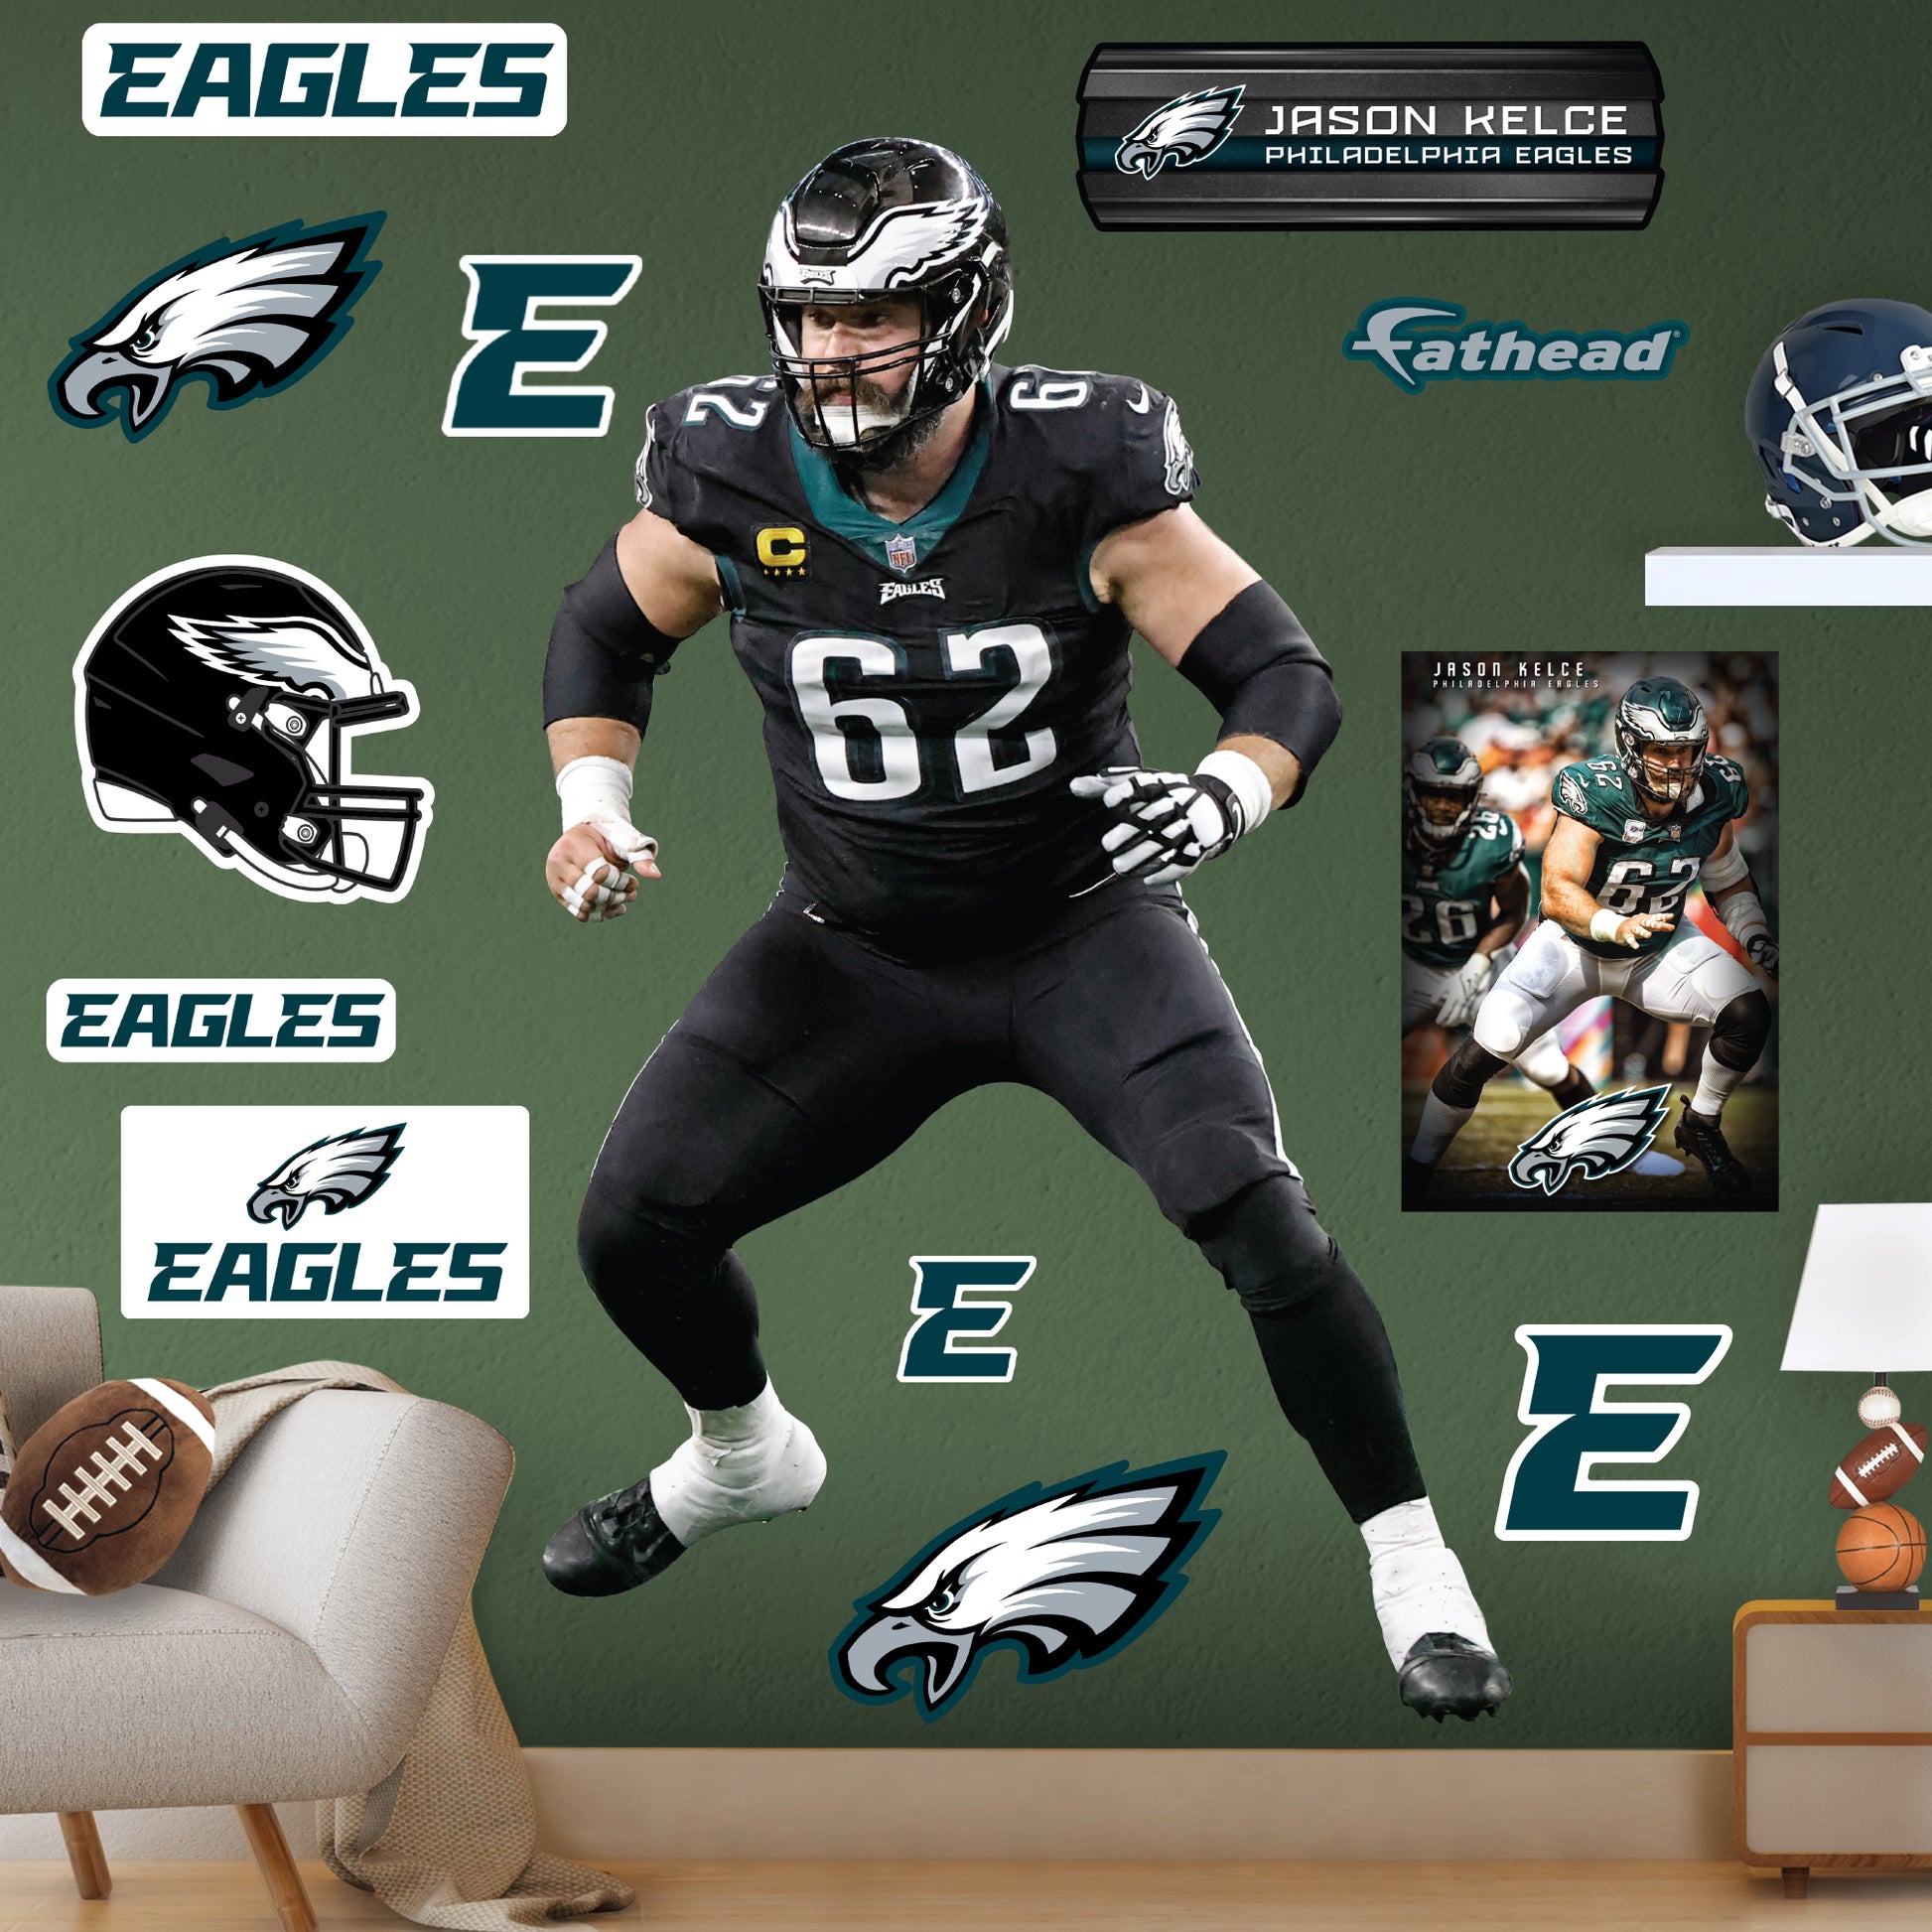 official site of the philadelphia eagles